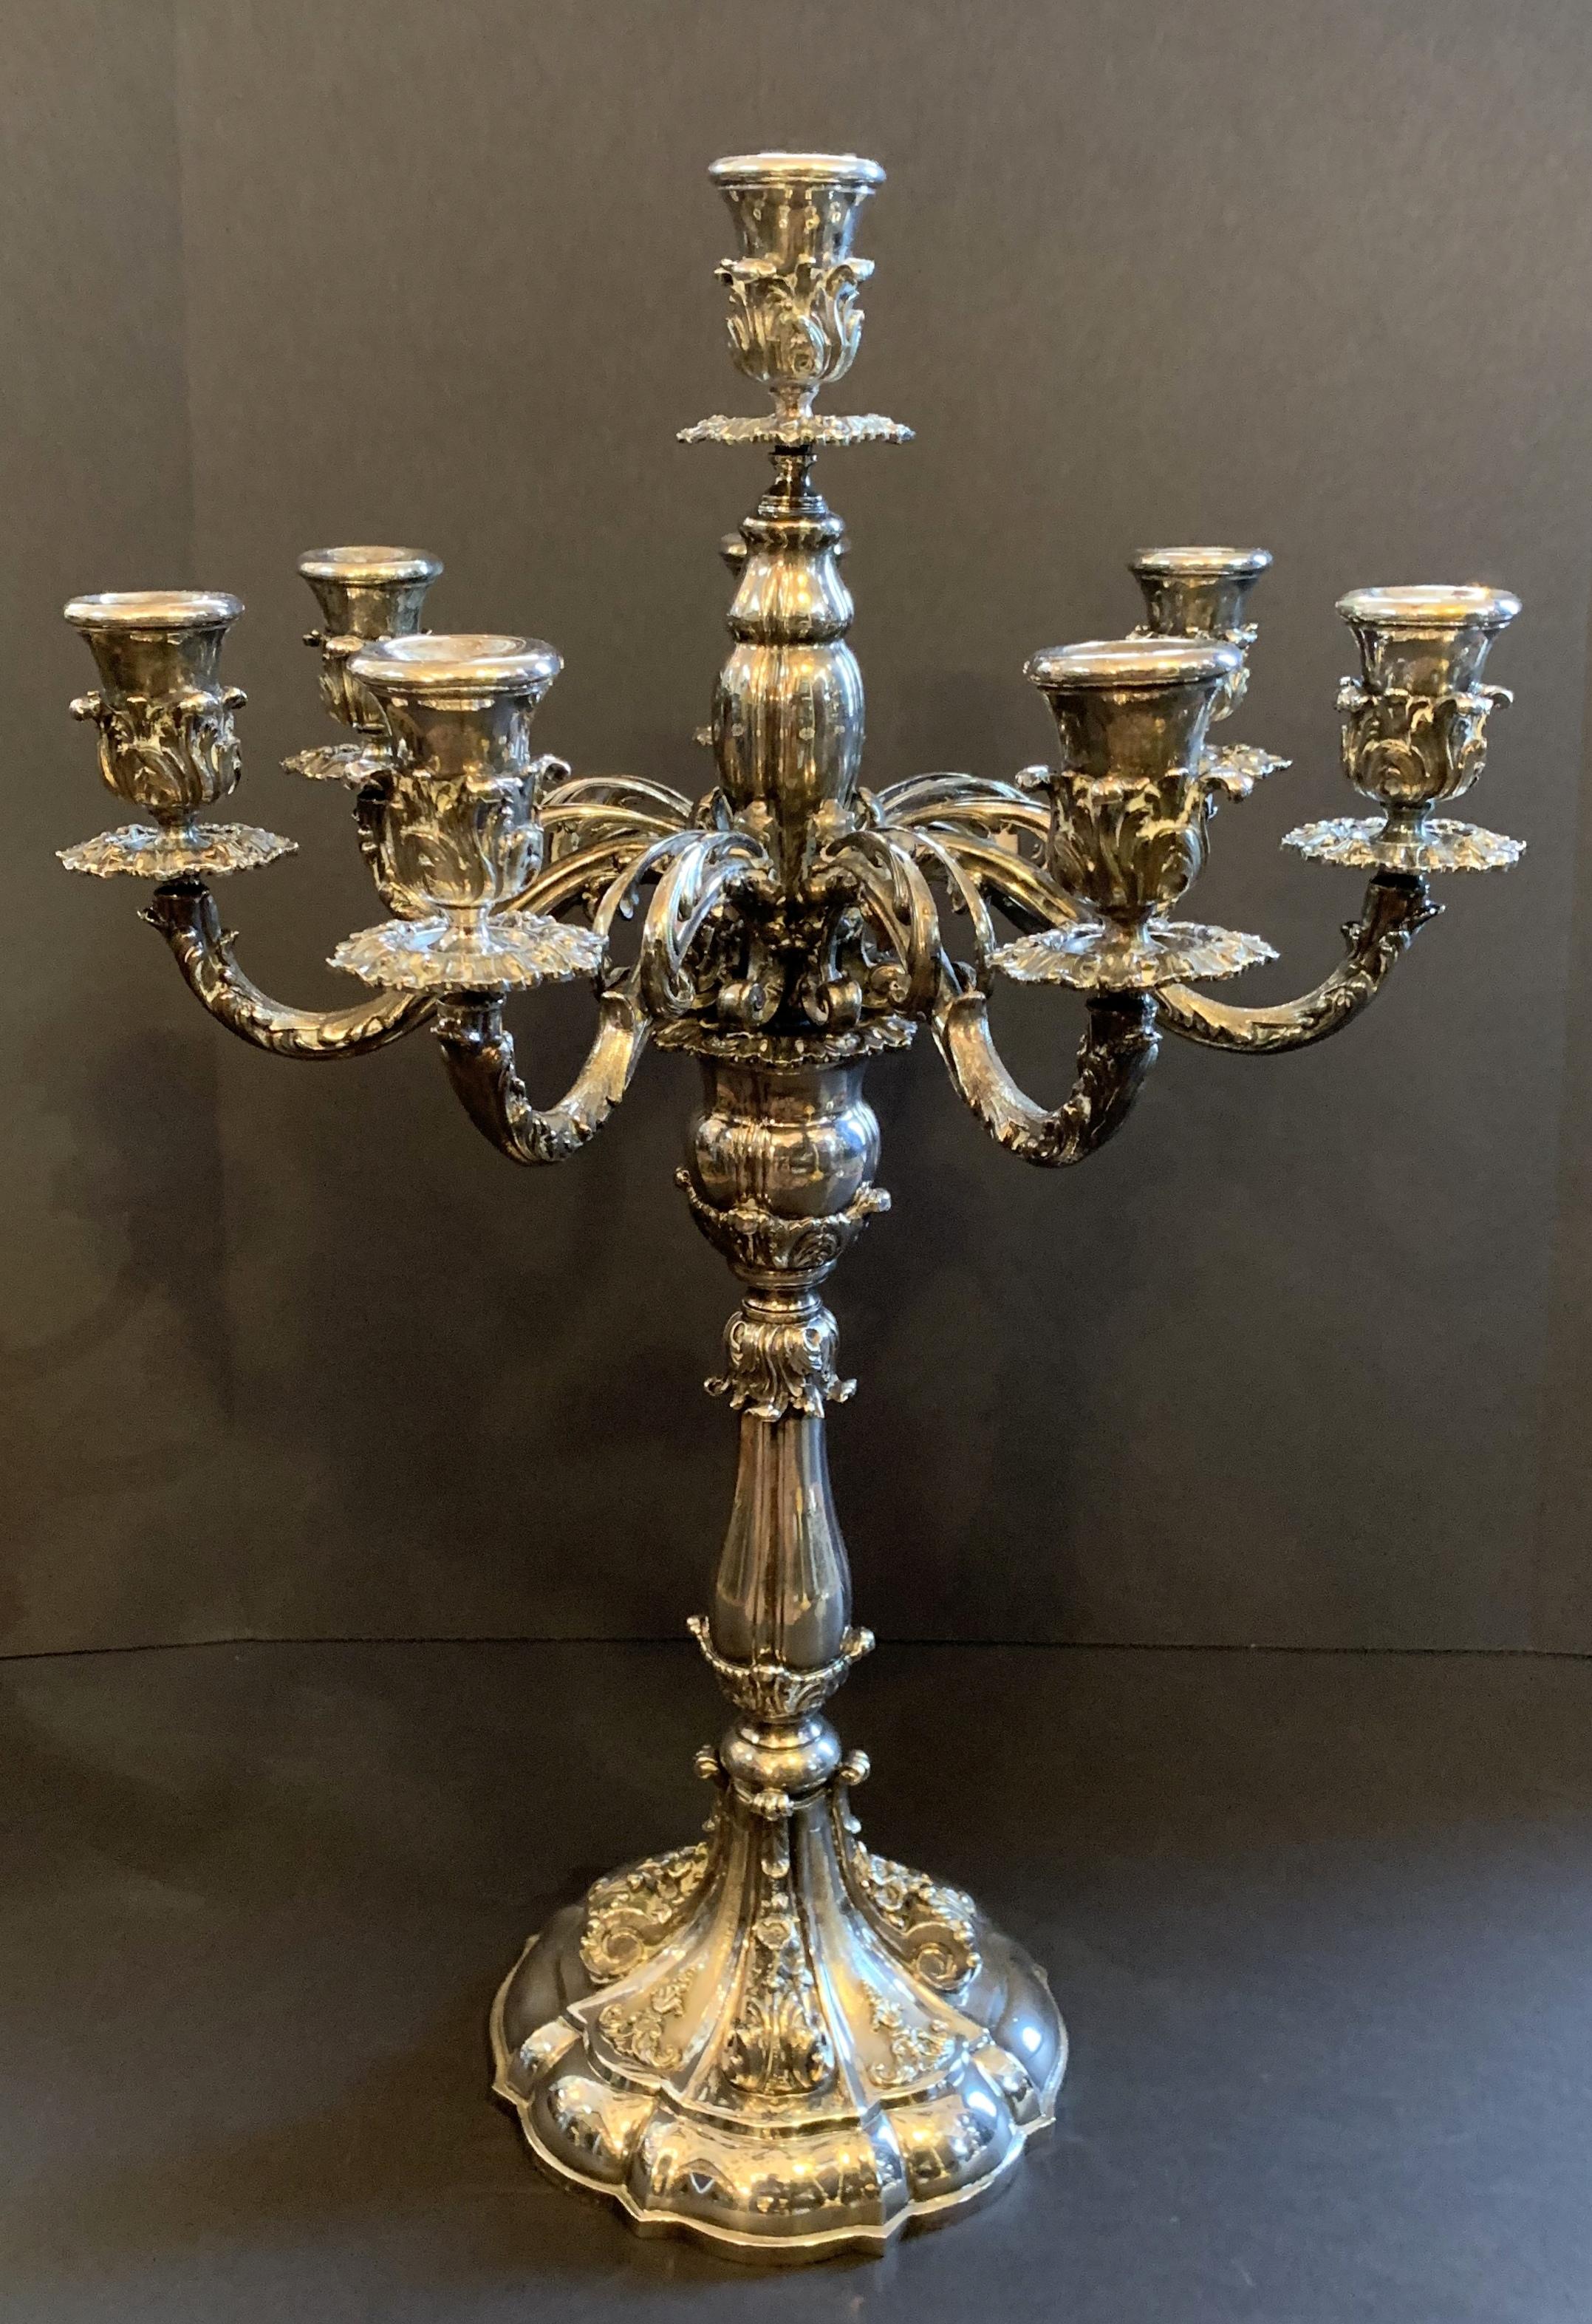 A wonderful pair of stamped Braganti Italy sterling silver plated heavy monumental 7-arm candelabra.